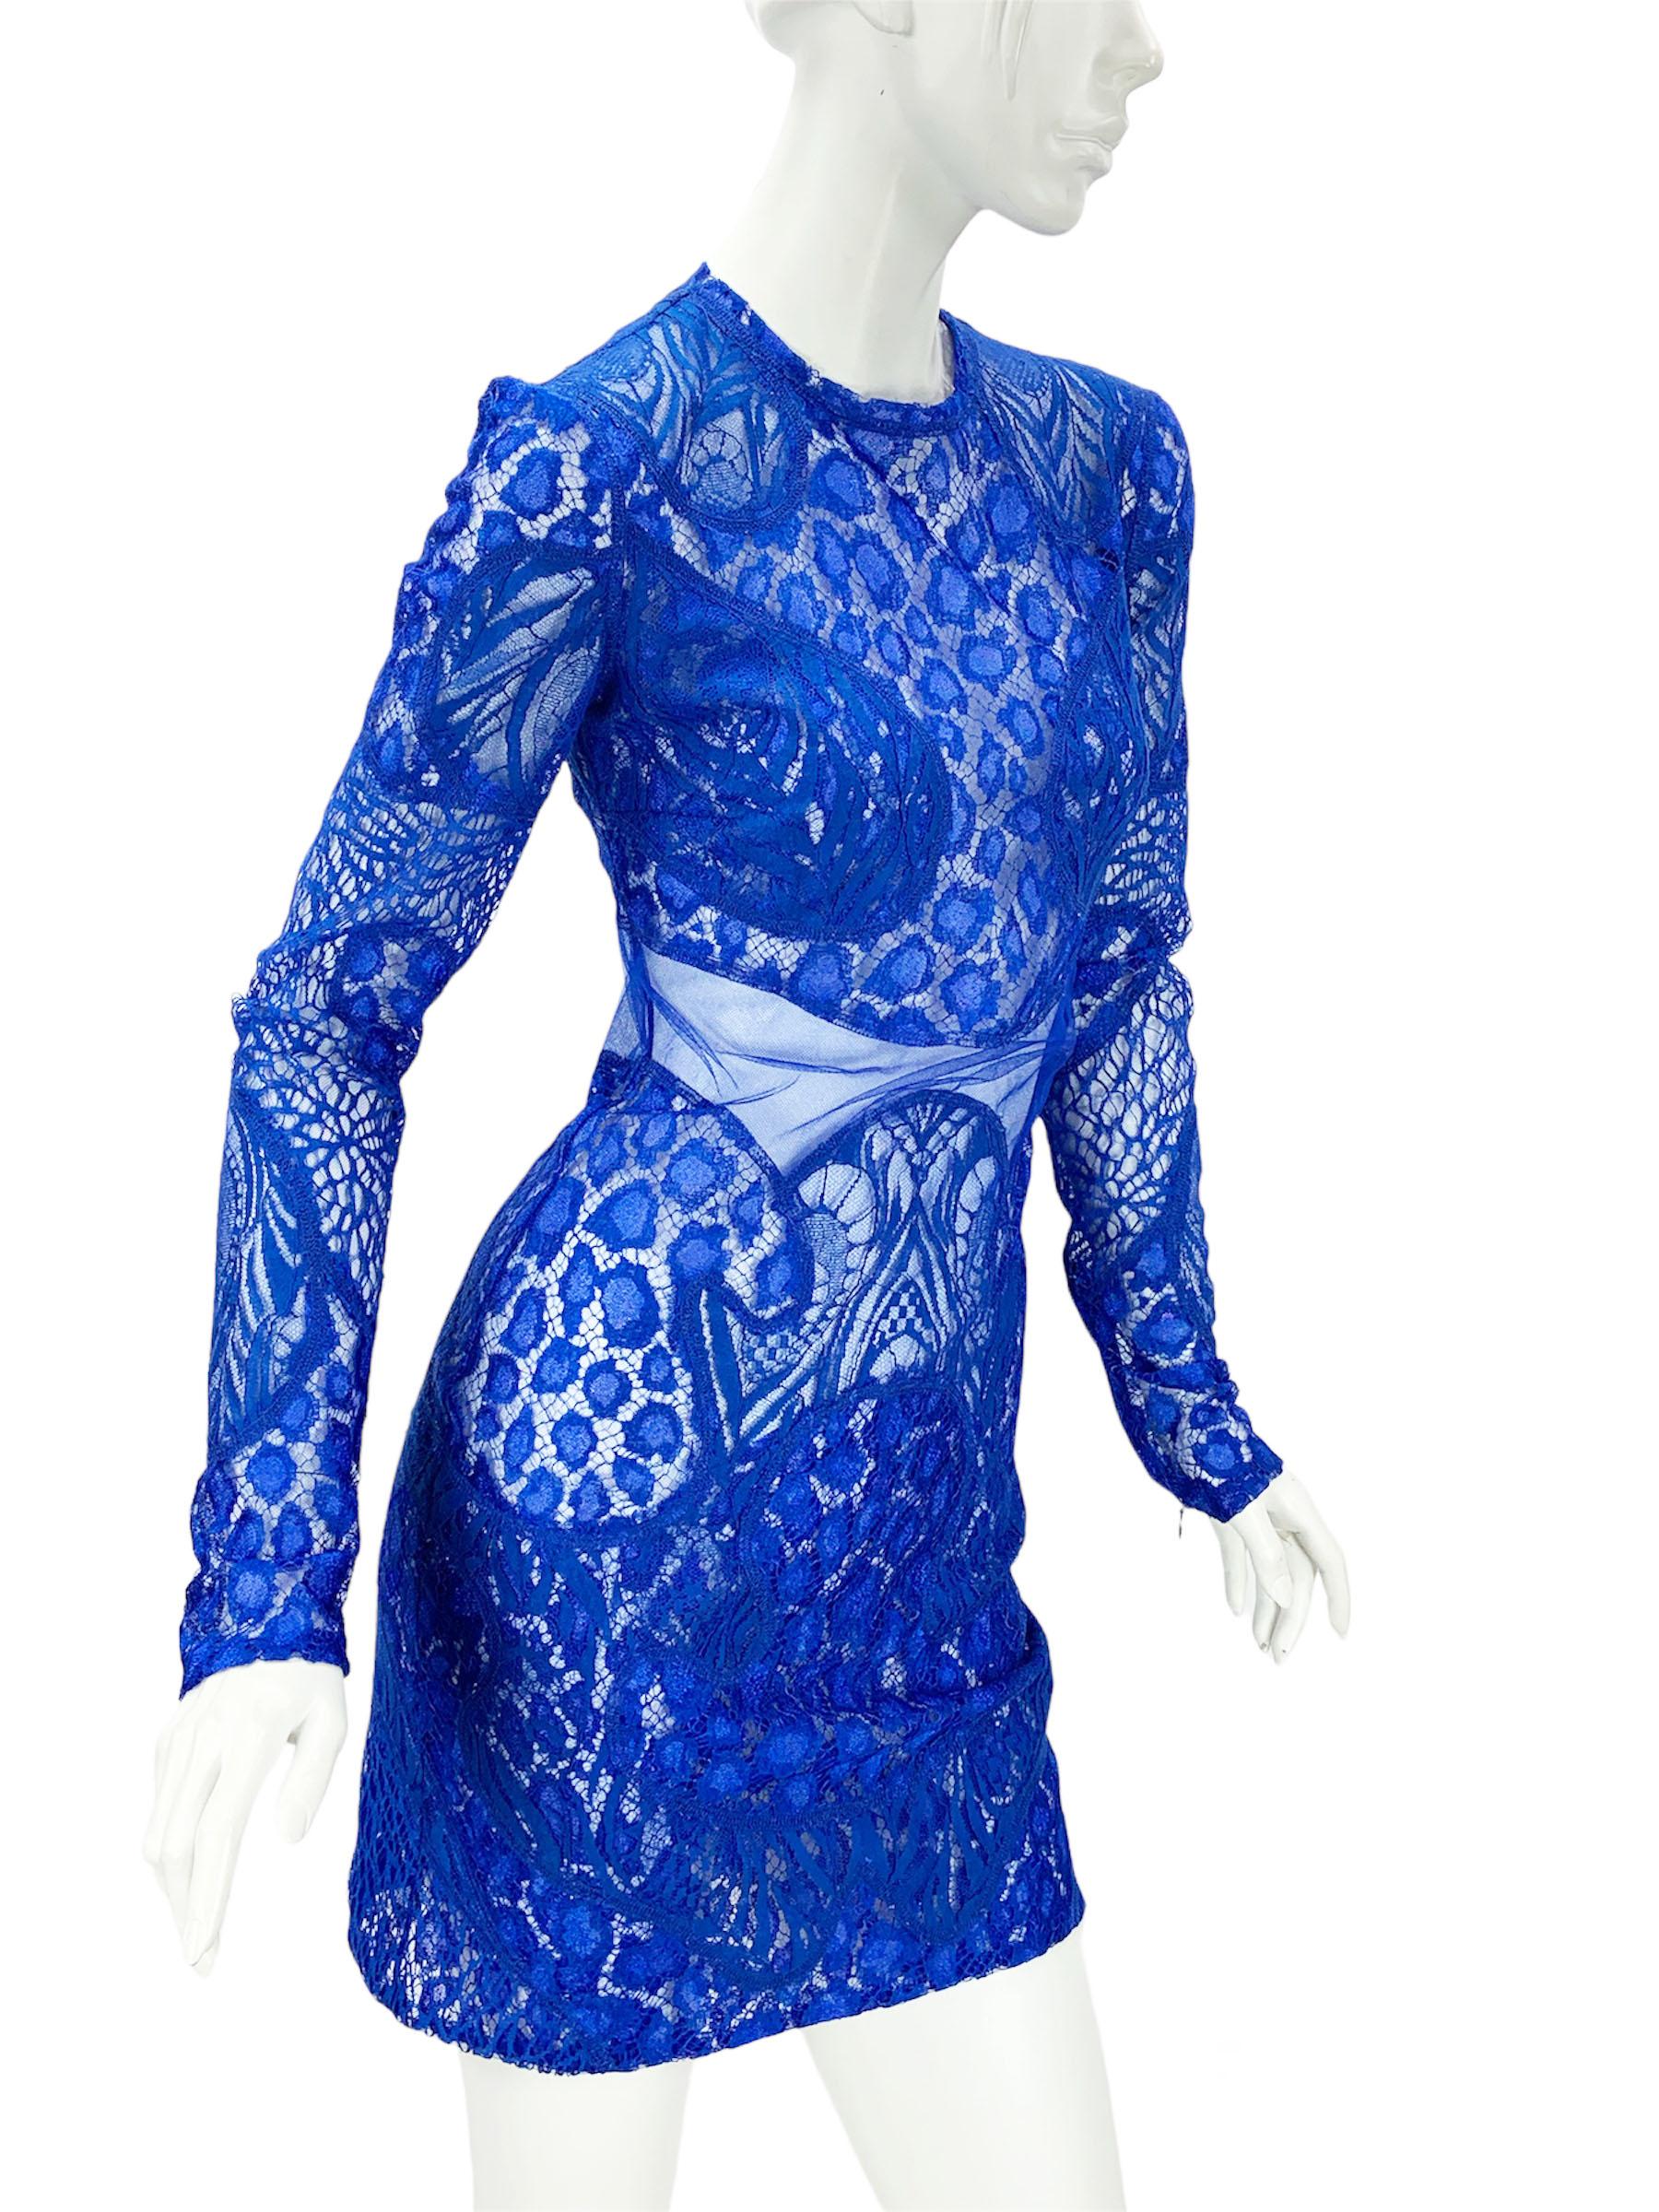 Tom Ford $5750 Cobalt Blue Leopard Chantilly-Lace Mini Dress Italian 38 In New Condition For Sale In Montgomery, TX